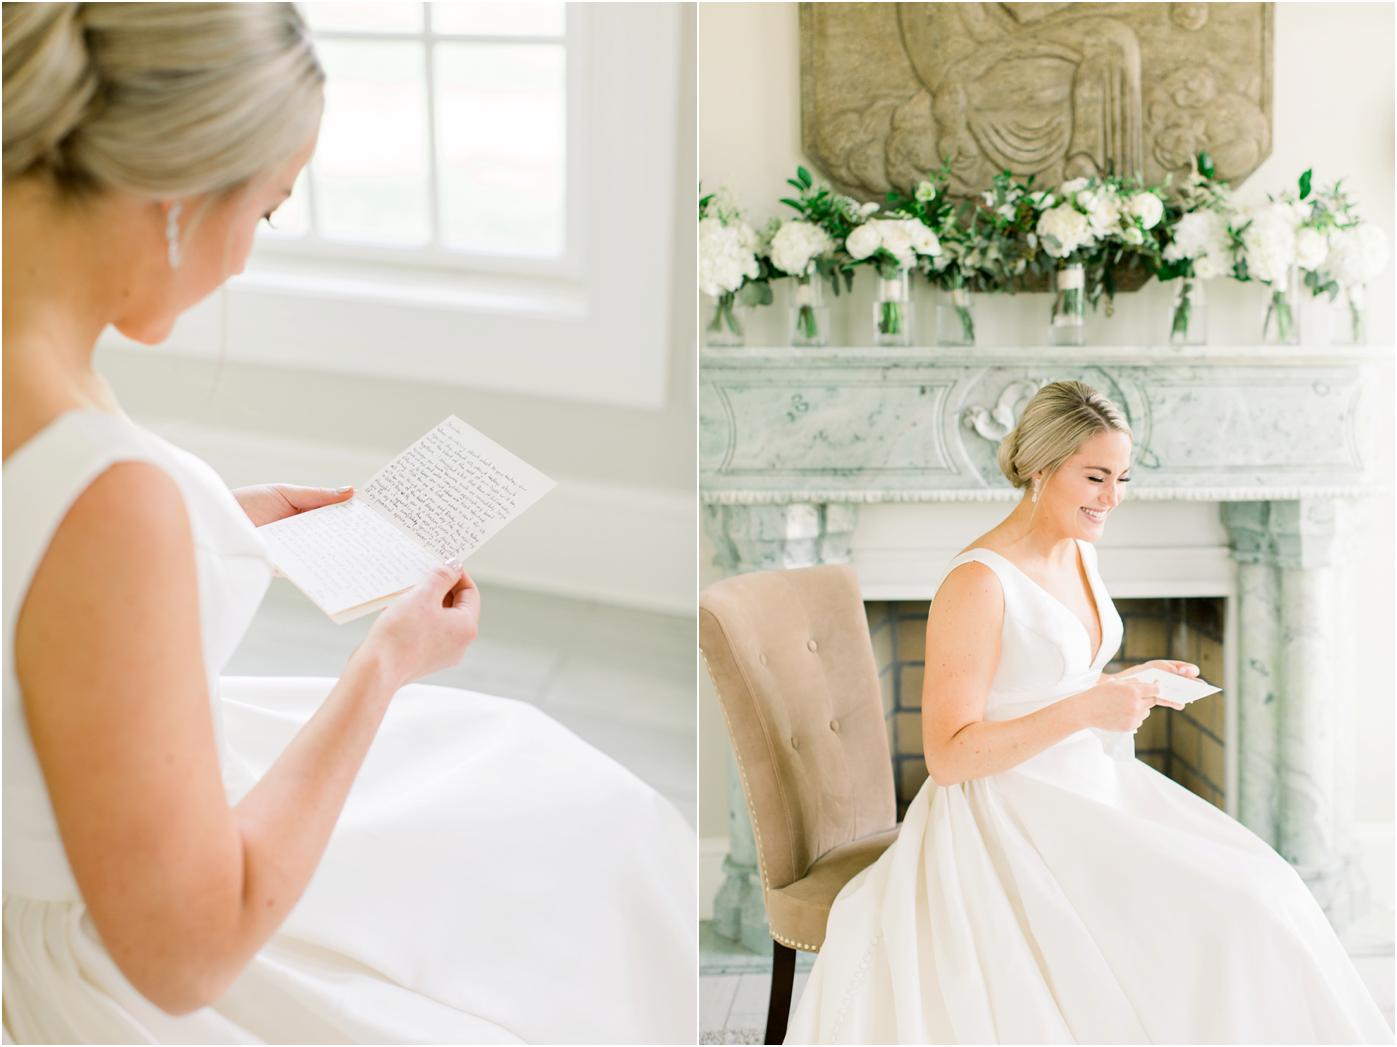 Bride reading note from Groom in the bridal suite at her Morais Vineyard Wedding